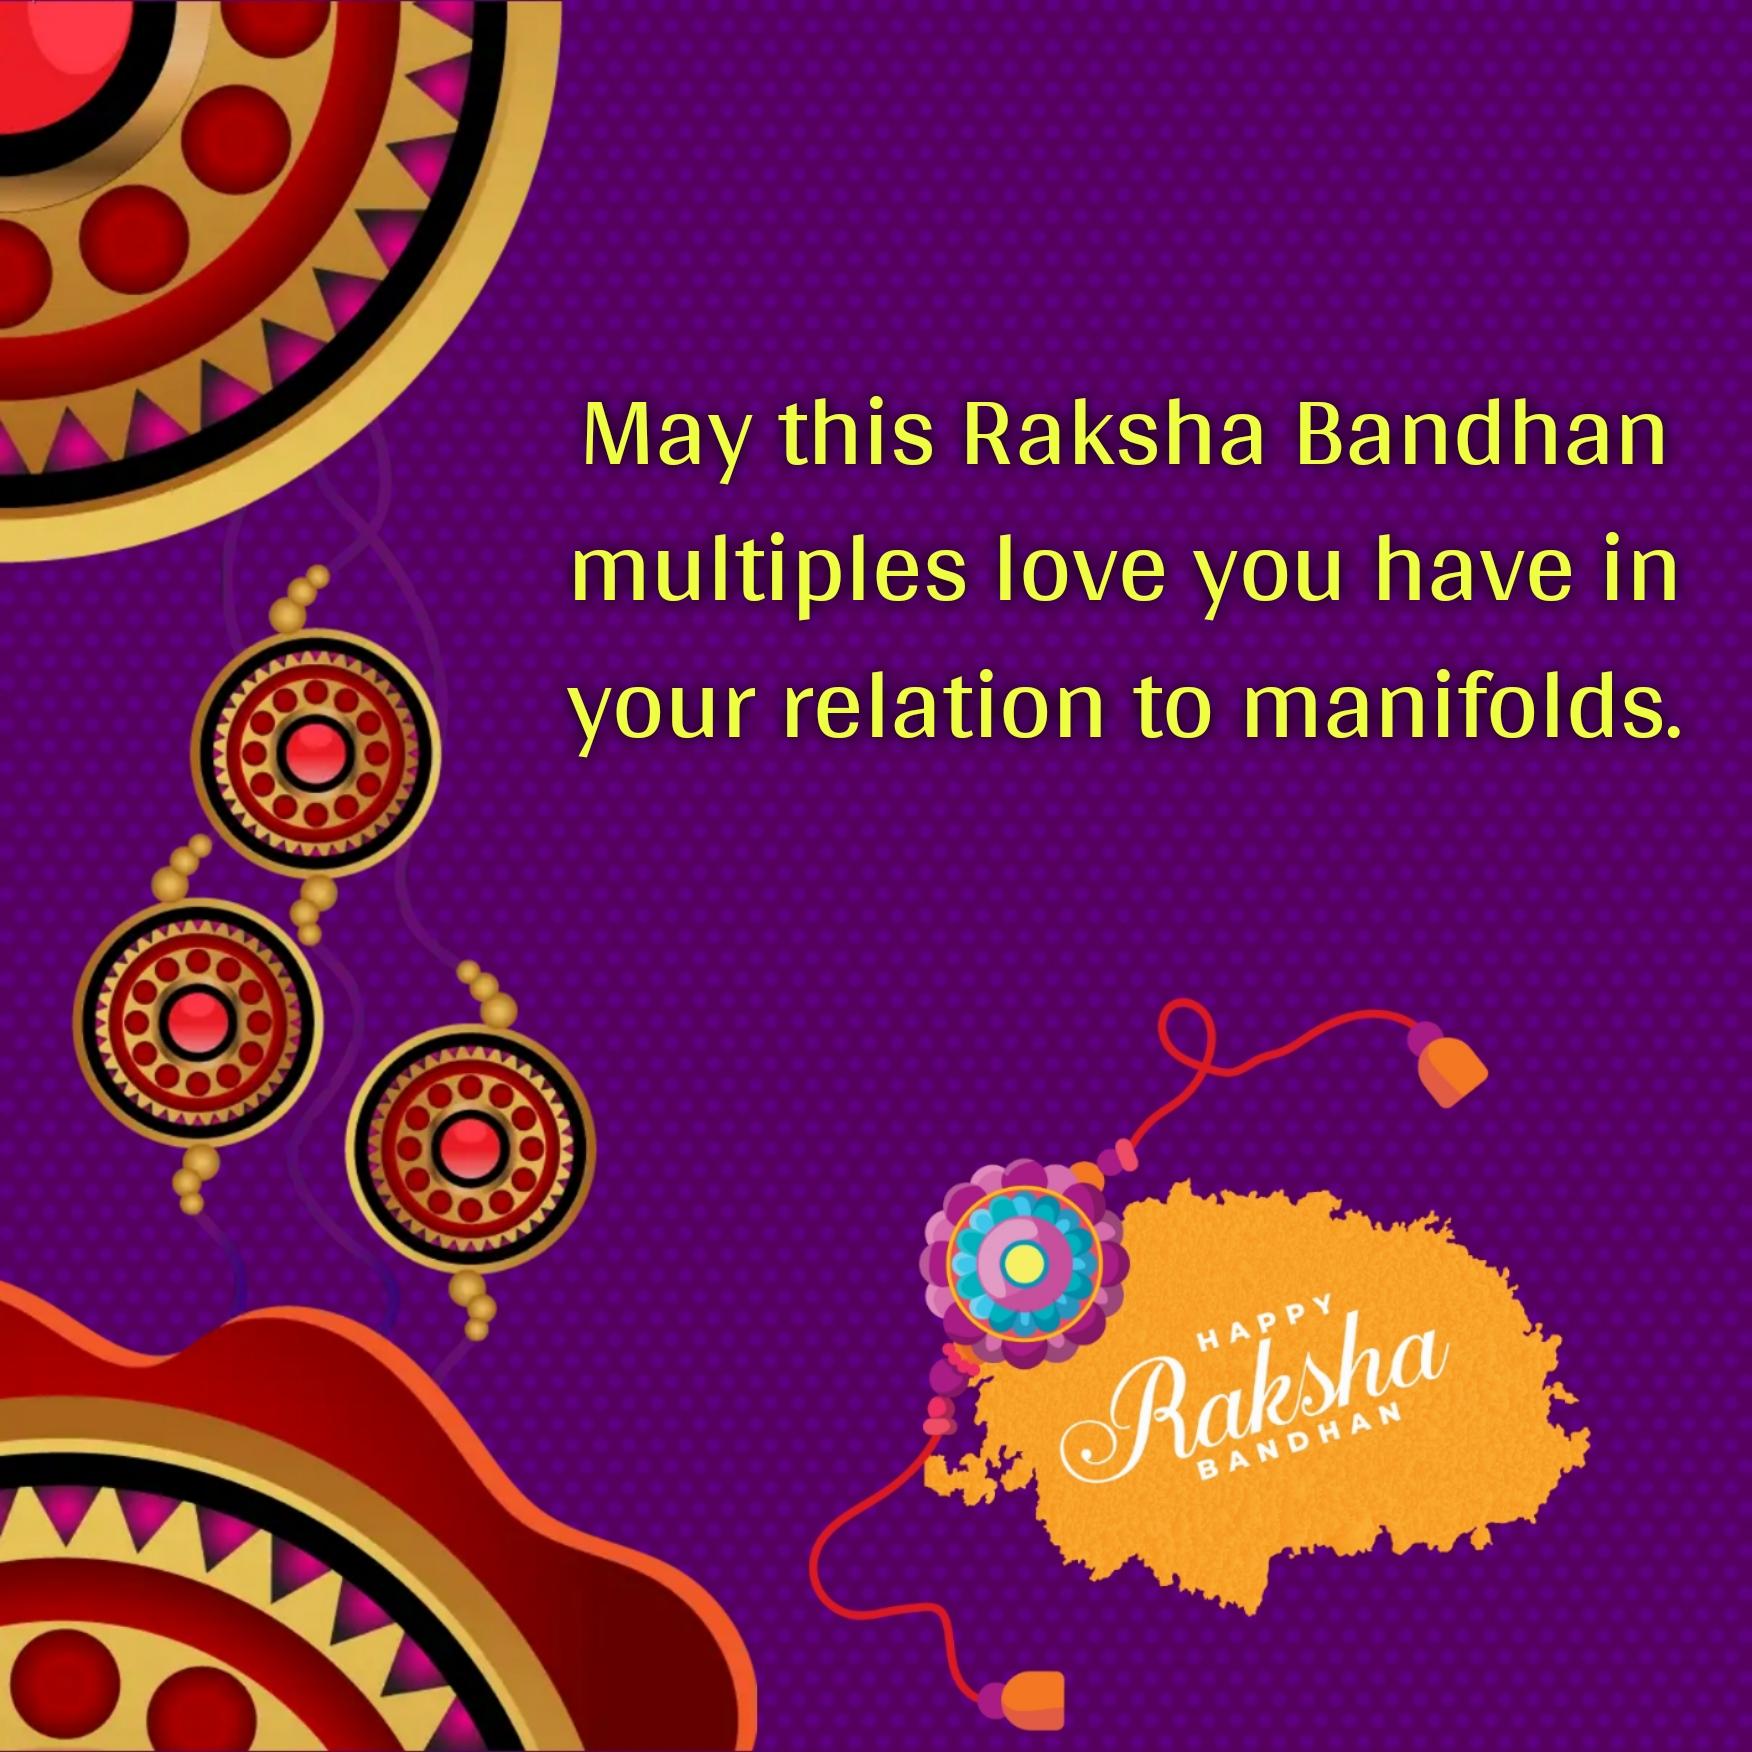 May this Raksha Bandhan multiples love you have in your relation